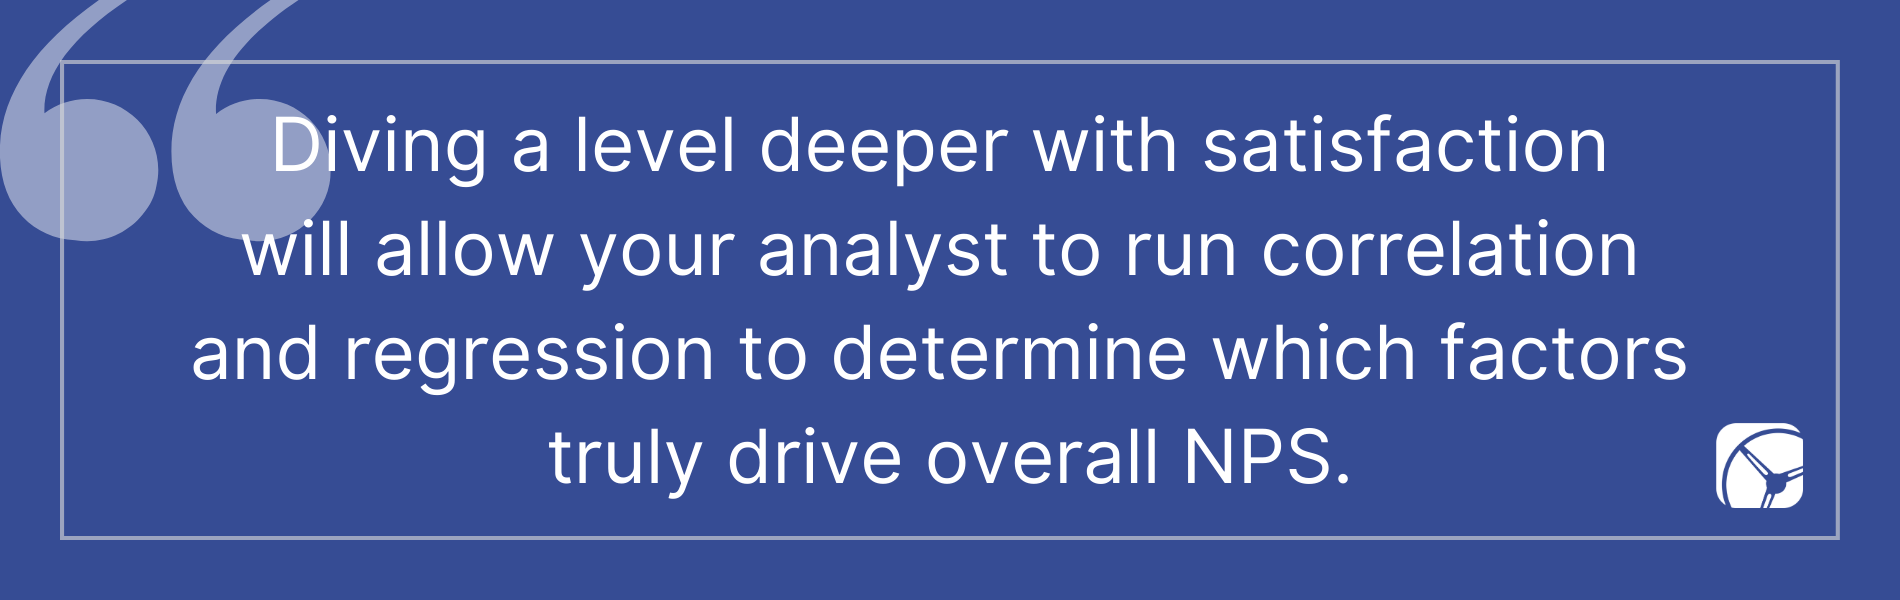 Diving a level deeper with satisfaction  will allow your analyst to run correlation  and regression to determine which factors  truly drive overall NPS.